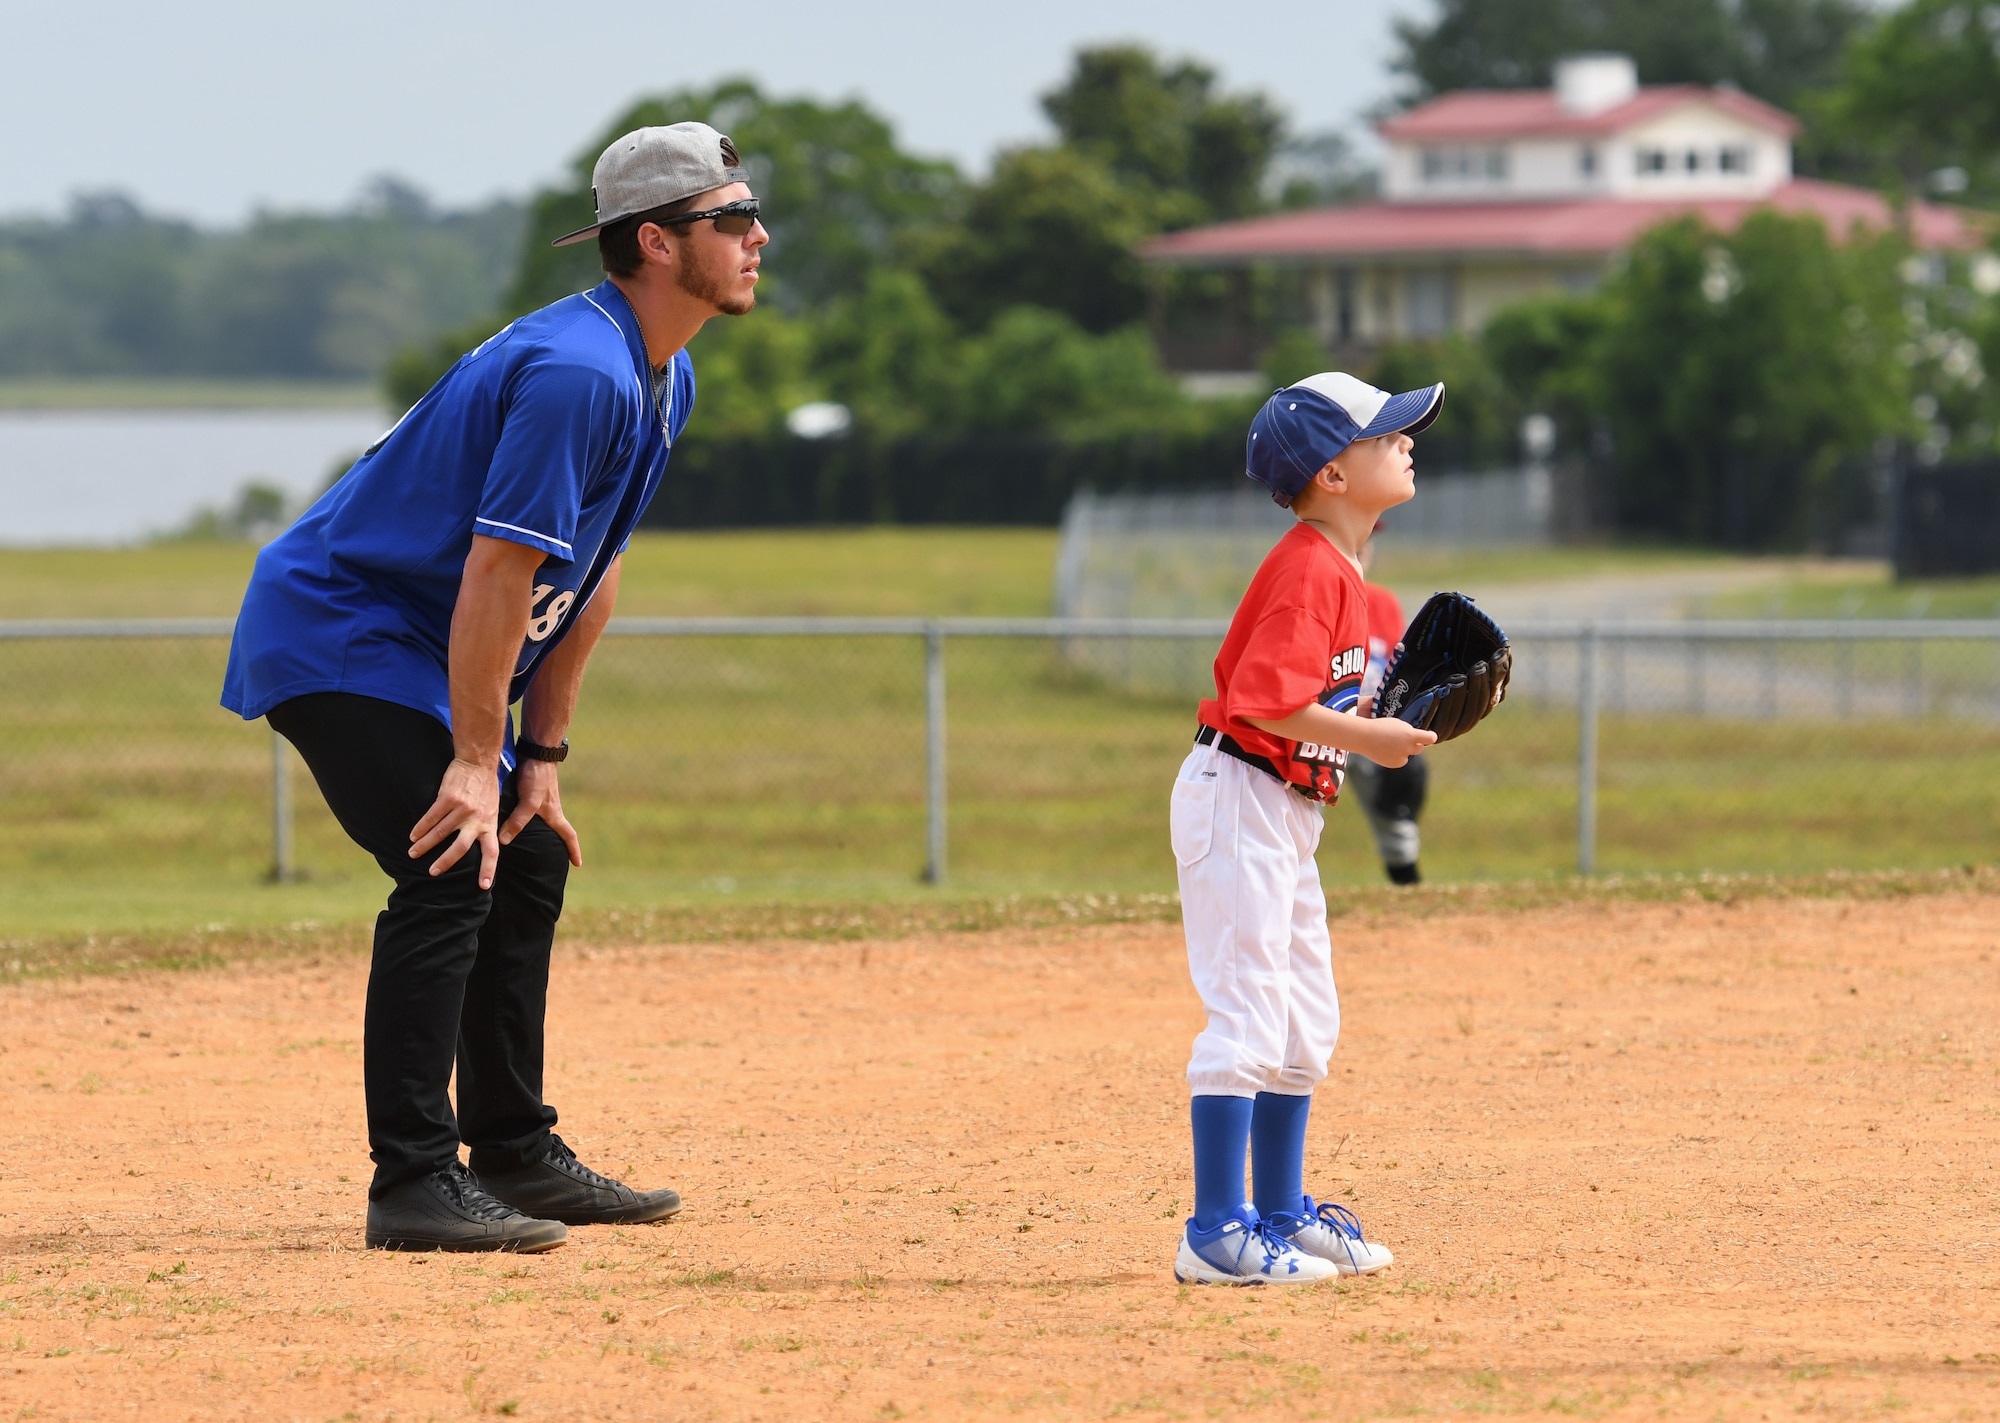 Dylan Moore, Biloxi Shuckers shortstop, assists Bradley Gaines, son of U.S. Air Force Capt. Sheila Gaines, 81st Medical Operations Squadron nurse, with fielding techniques during the Biloxi Shuckers Youth Baseball Clinic on the youth center baseball field at Keesler Air Force Base, Mississippi, May 5, 2018. The clinic provided hitting, pitching, base running and fielding instruction from members of the Biloxi Shuckers minor league baseball team. (U.S. Air Force photo by Kemberly Groue)